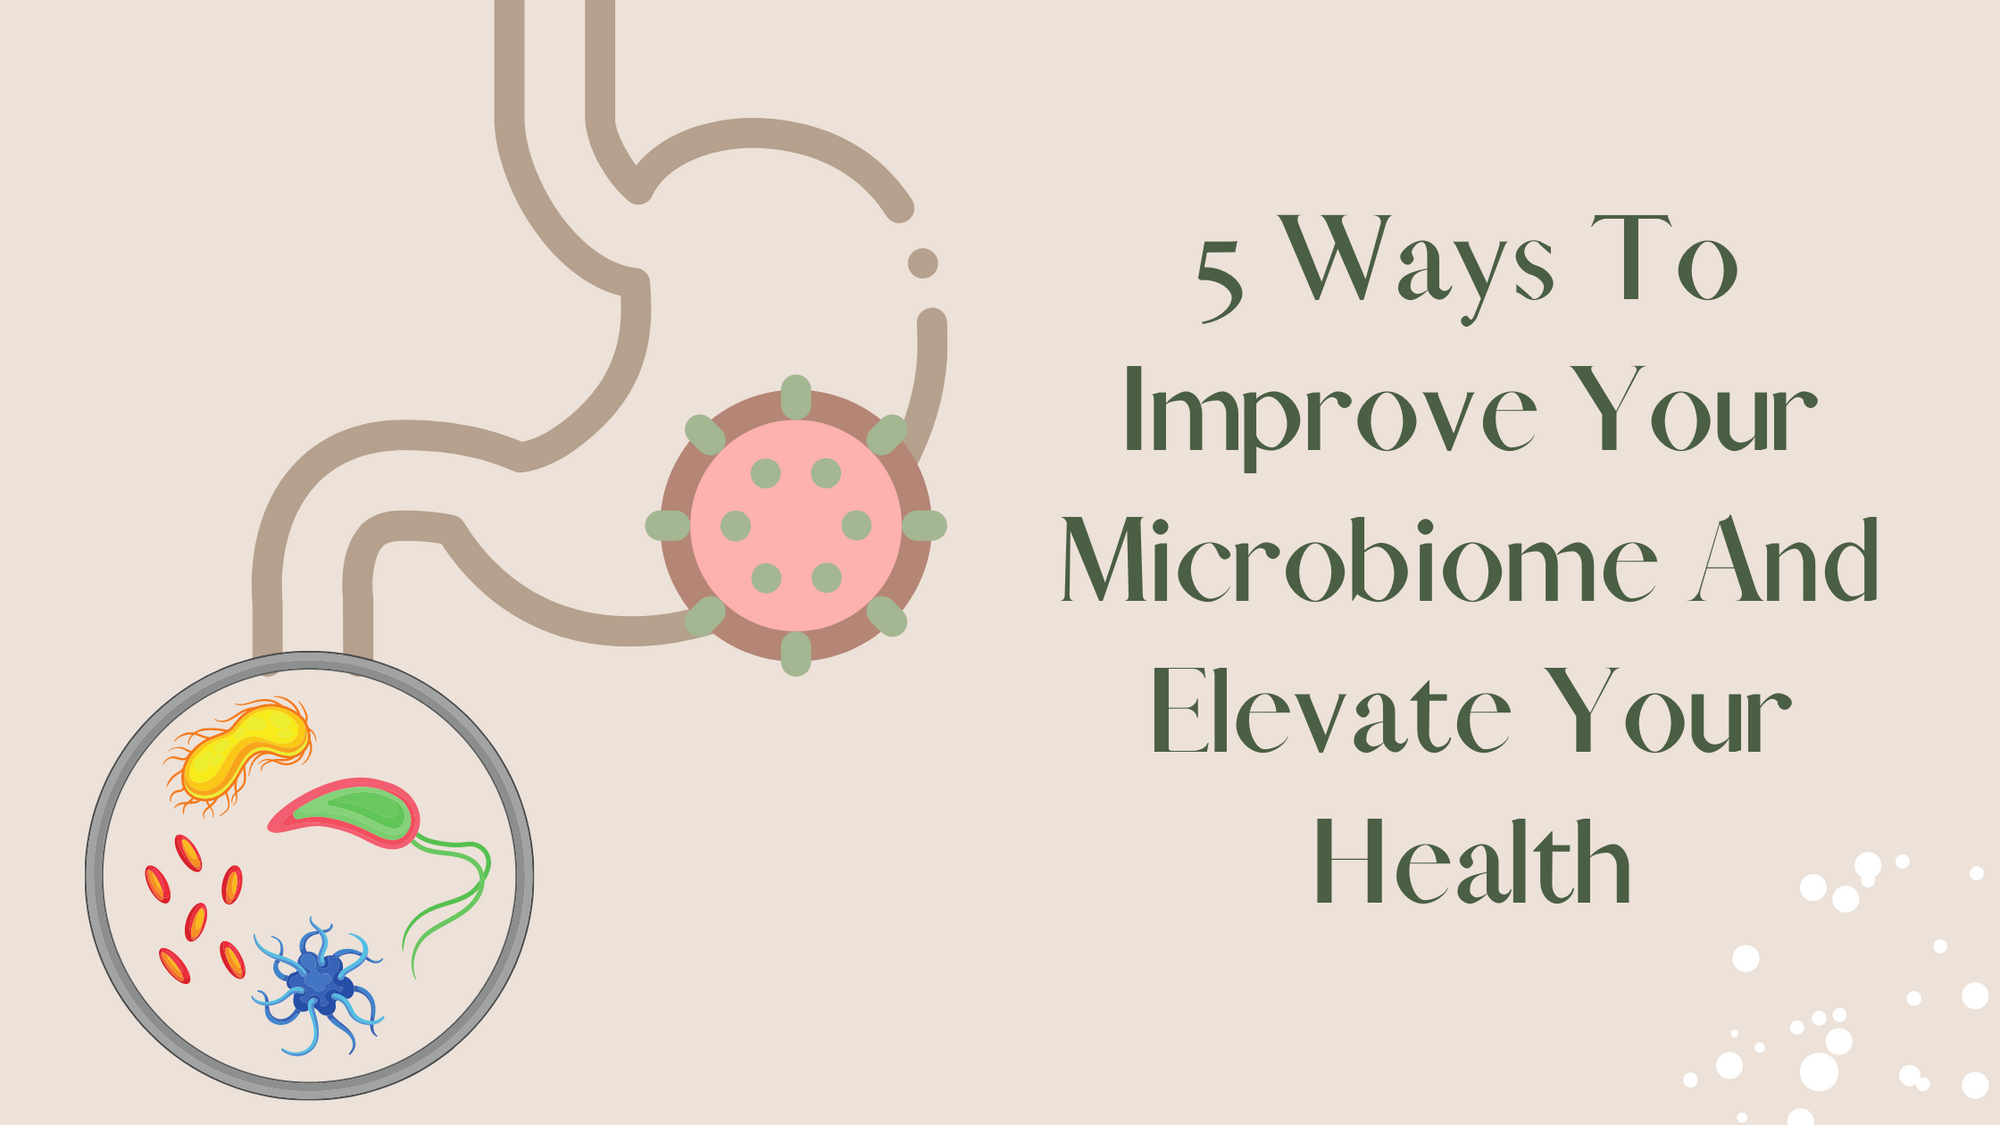 Microbi...What? 5 Ways To Improve Your Microbiome And Elevate Your Health